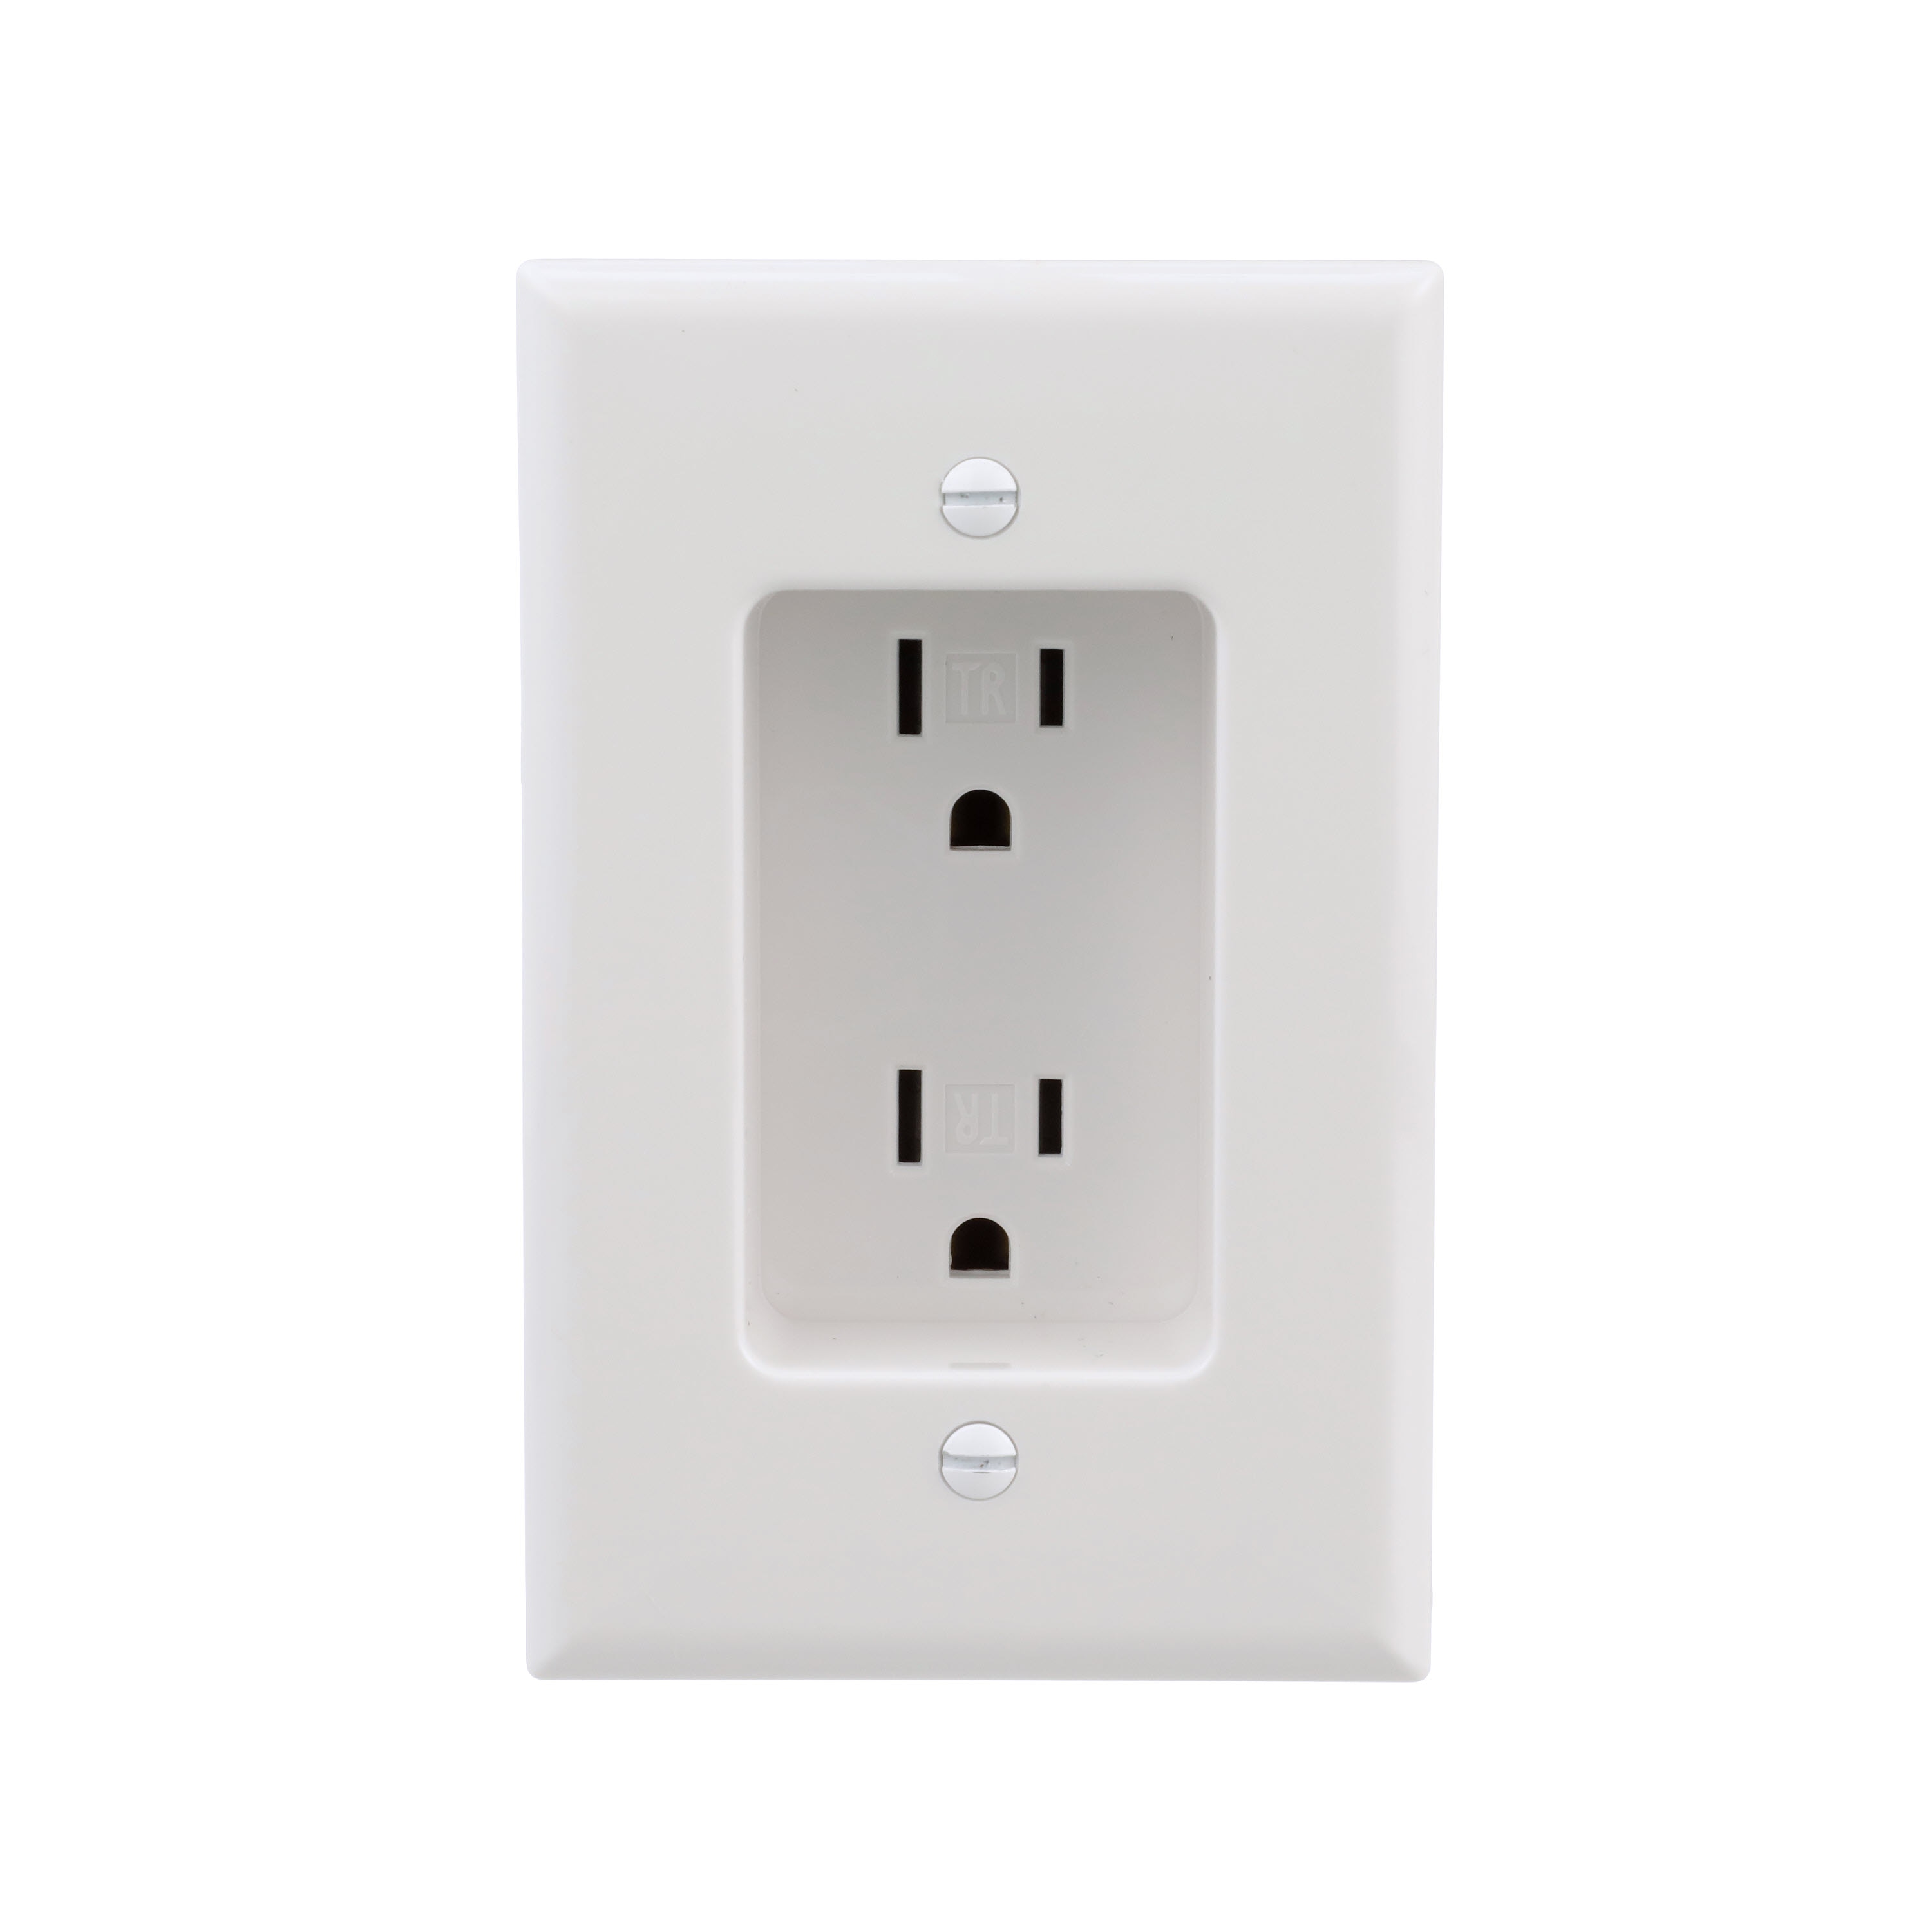 Air conditioner power outlet Electrical Outlets at